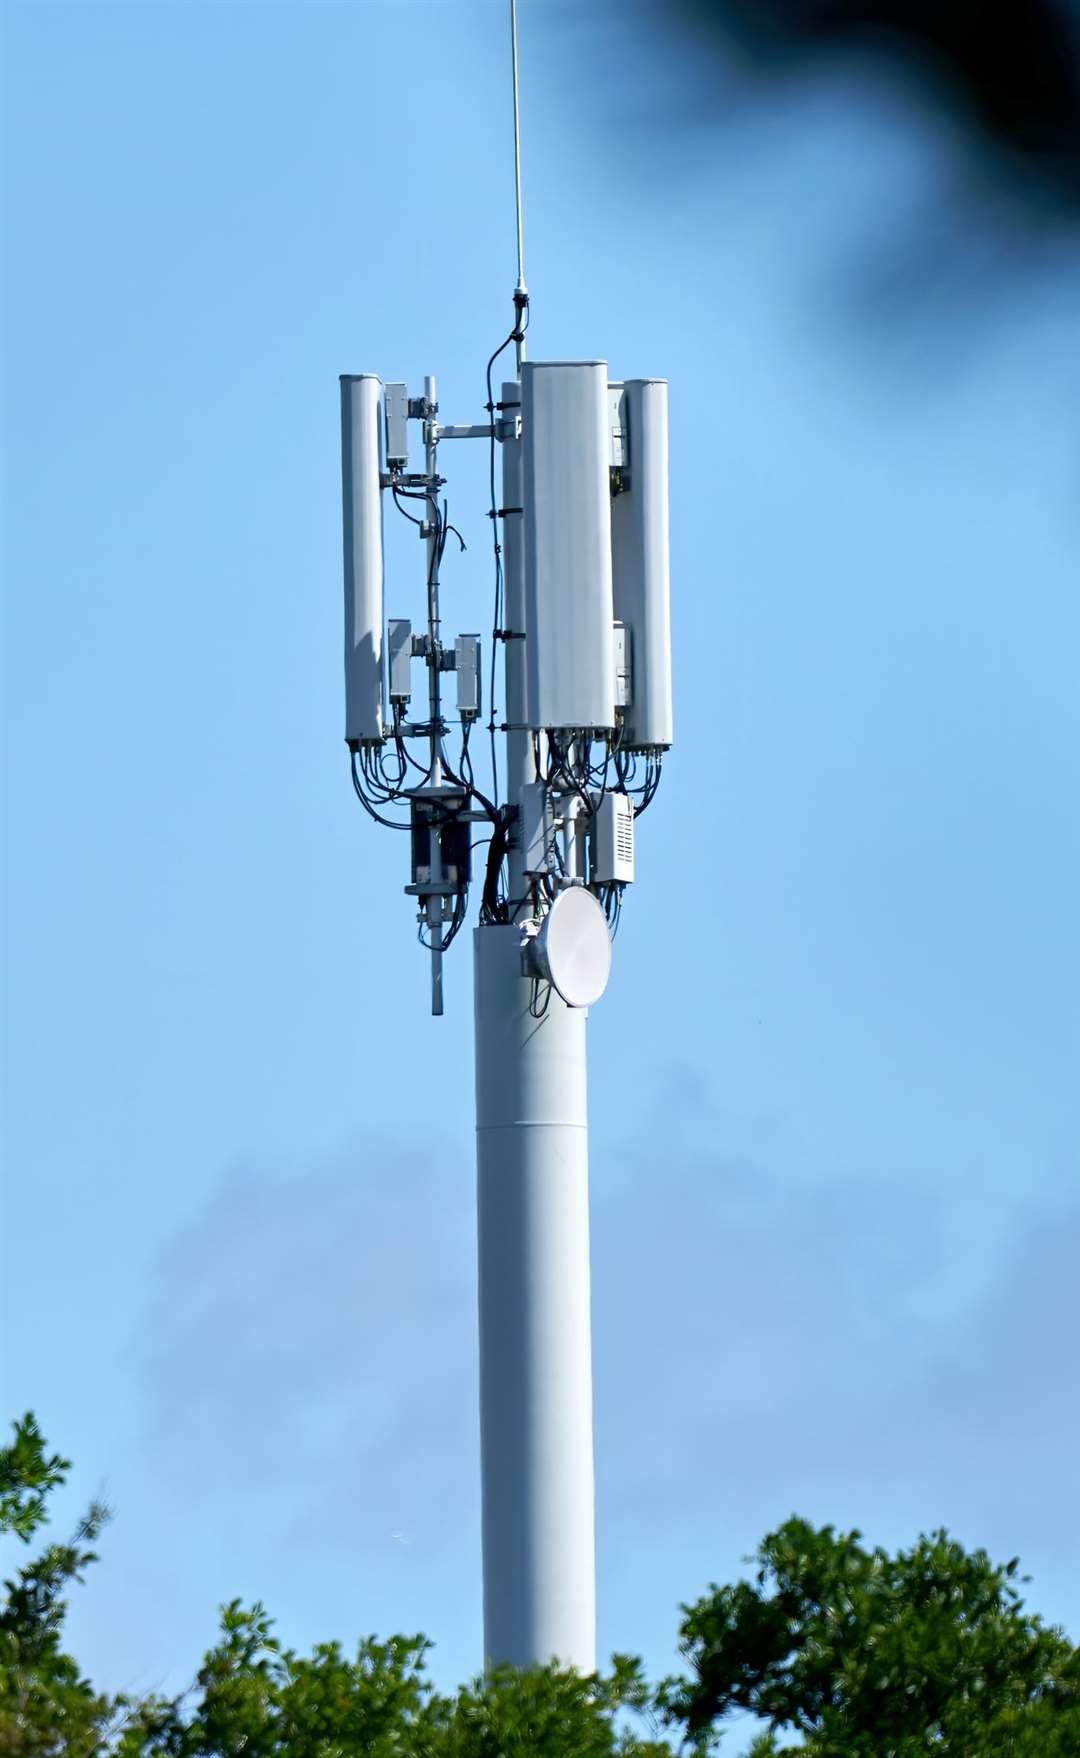 A 5G mast similar to that which is being proposed for the Meads area